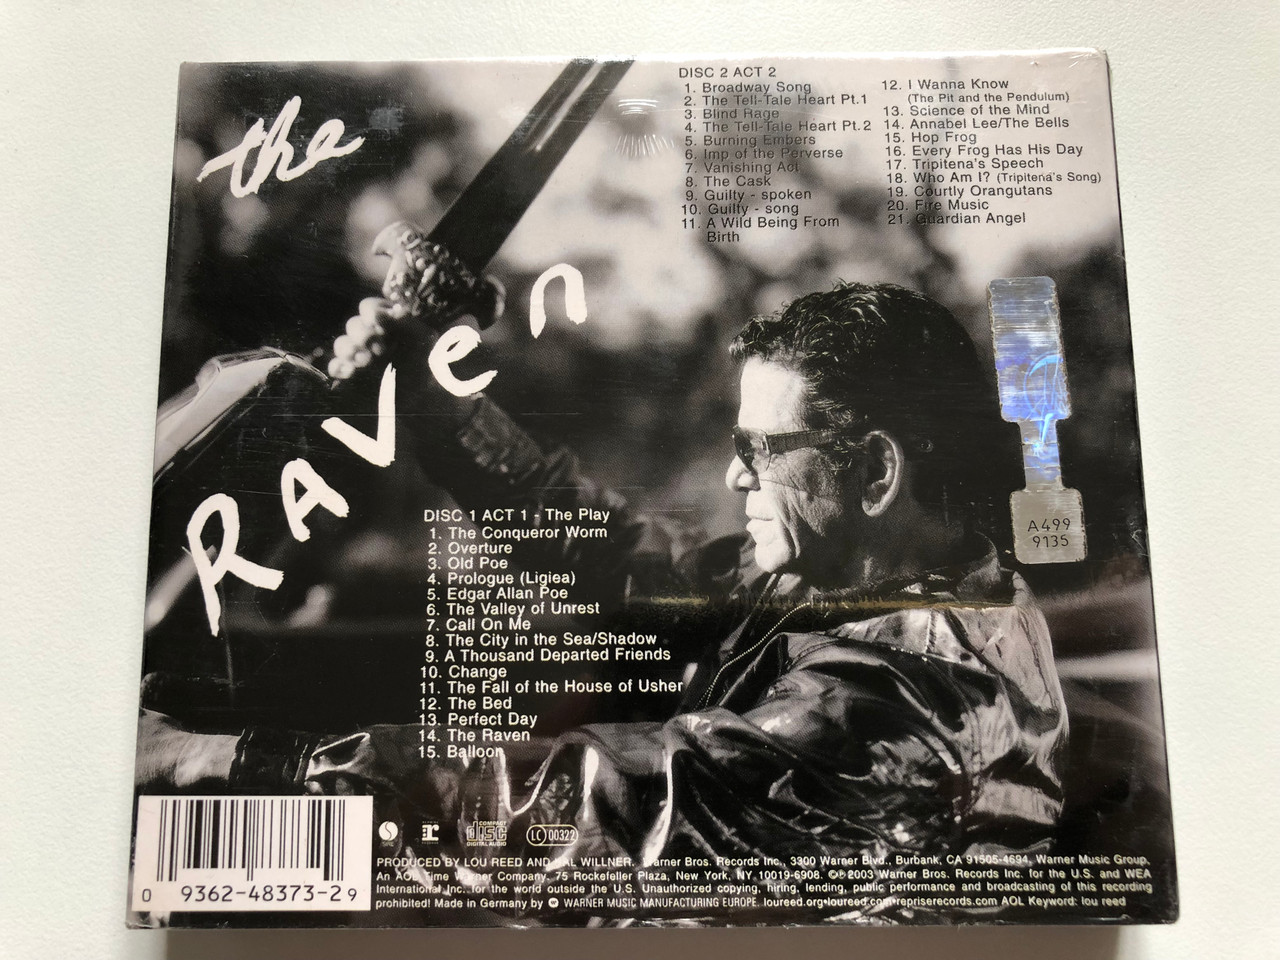 https://cdn10.bigcommerce.com/s-62bdpkt7pb/products/0/images/240748/Lou_Reed_The_Raven_Limited_Edition_2-CD_Set_featuring_Who_Am_I_with_special_guests_Laurie_Anderson_Antony_The_Blind_Boys_of_Alabama_Ornette_Coleman_Steve_Buscemi_Sire_2x_Audio___94857.1658315815.1280.1280.JPG?c=2&_gl=1*oi1fw5*_ga*MjA2NTIxMjE2MC4xNTkwNTEyNTMy*_ga_WS2VZYPC6G*MTY1ODMxNDU5Ni40OTAuMS4xNjU4MzE1ODE4LjYw